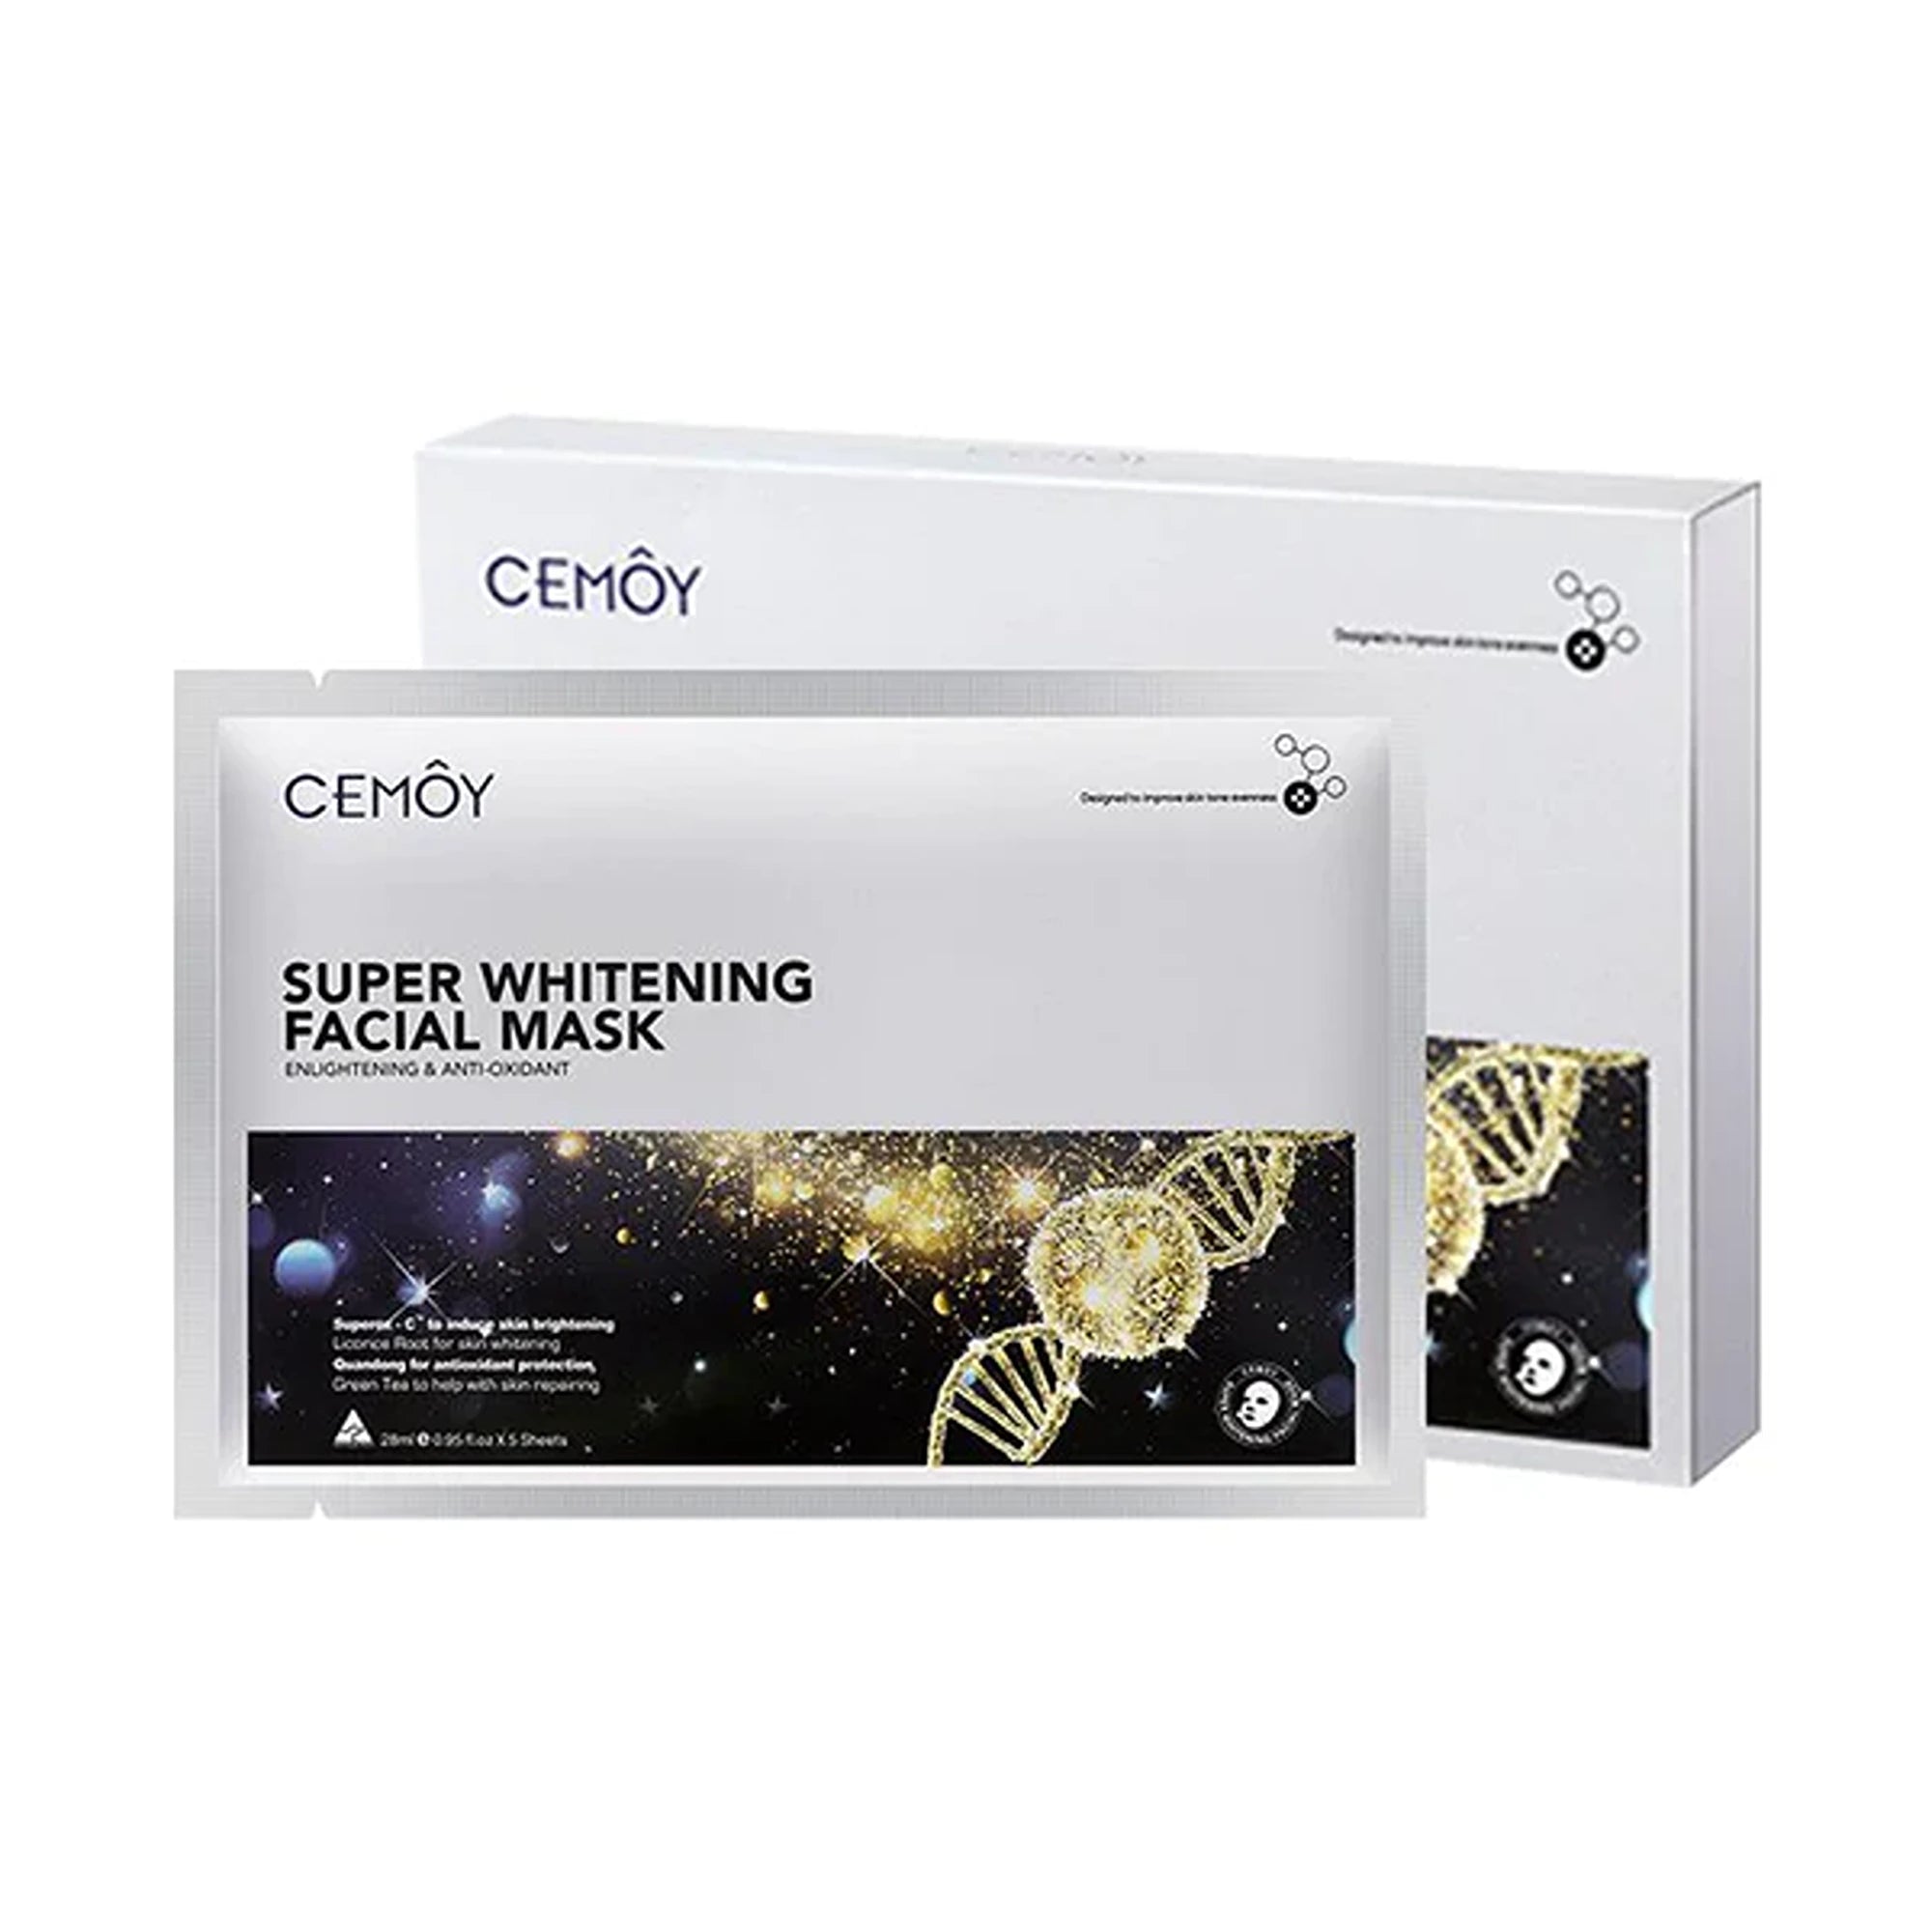 CEMOY 21 Super Whitening Facial Mask 5 Pack